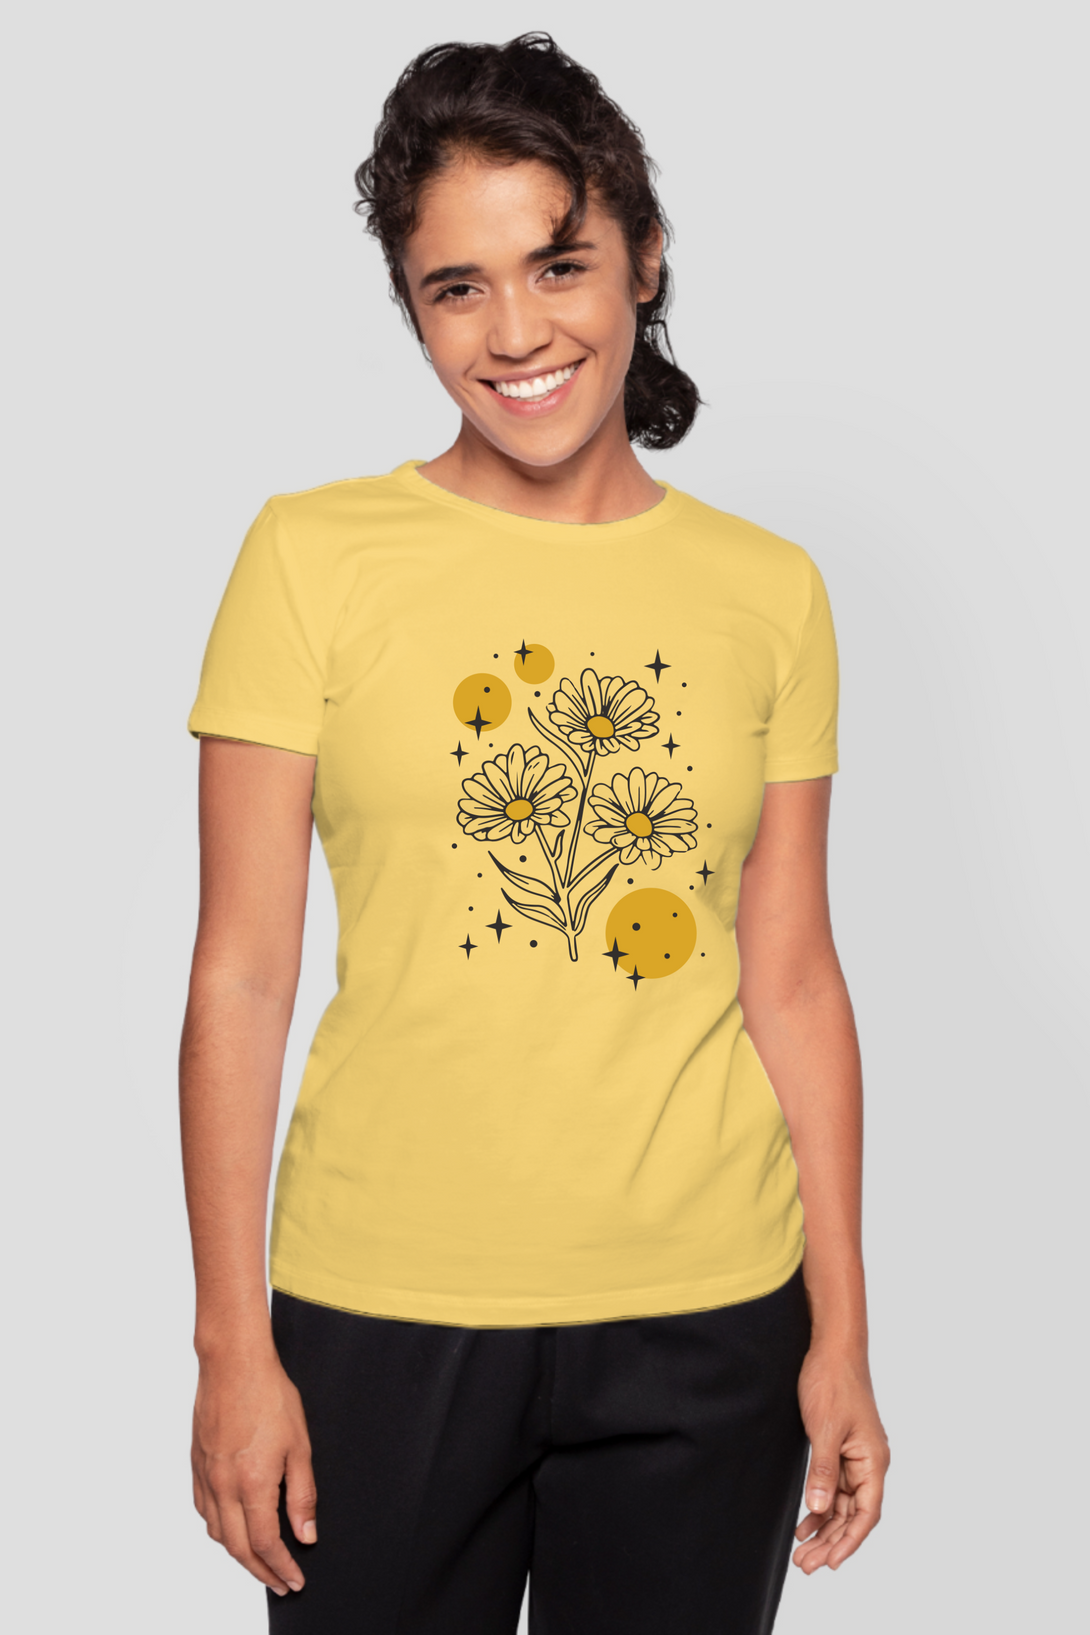 Sparkling Flowers Printed T-Shirt For Women - WowWaves - 11